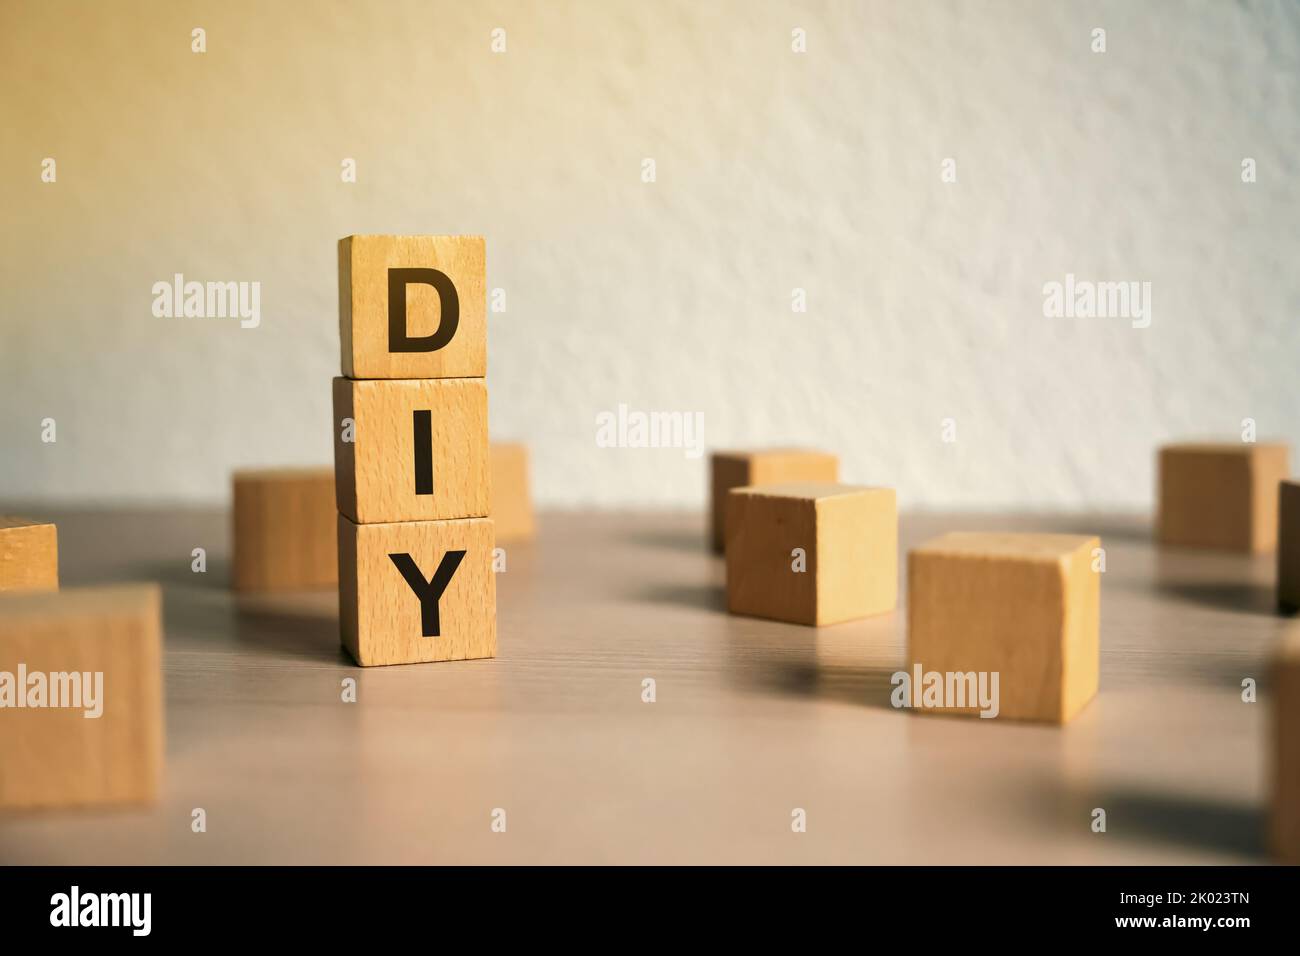 Wooden blocks with the word DIY - Do It Yourself concept. The method of self-creation of things without the help of professionals. Selective focus Stock Photo